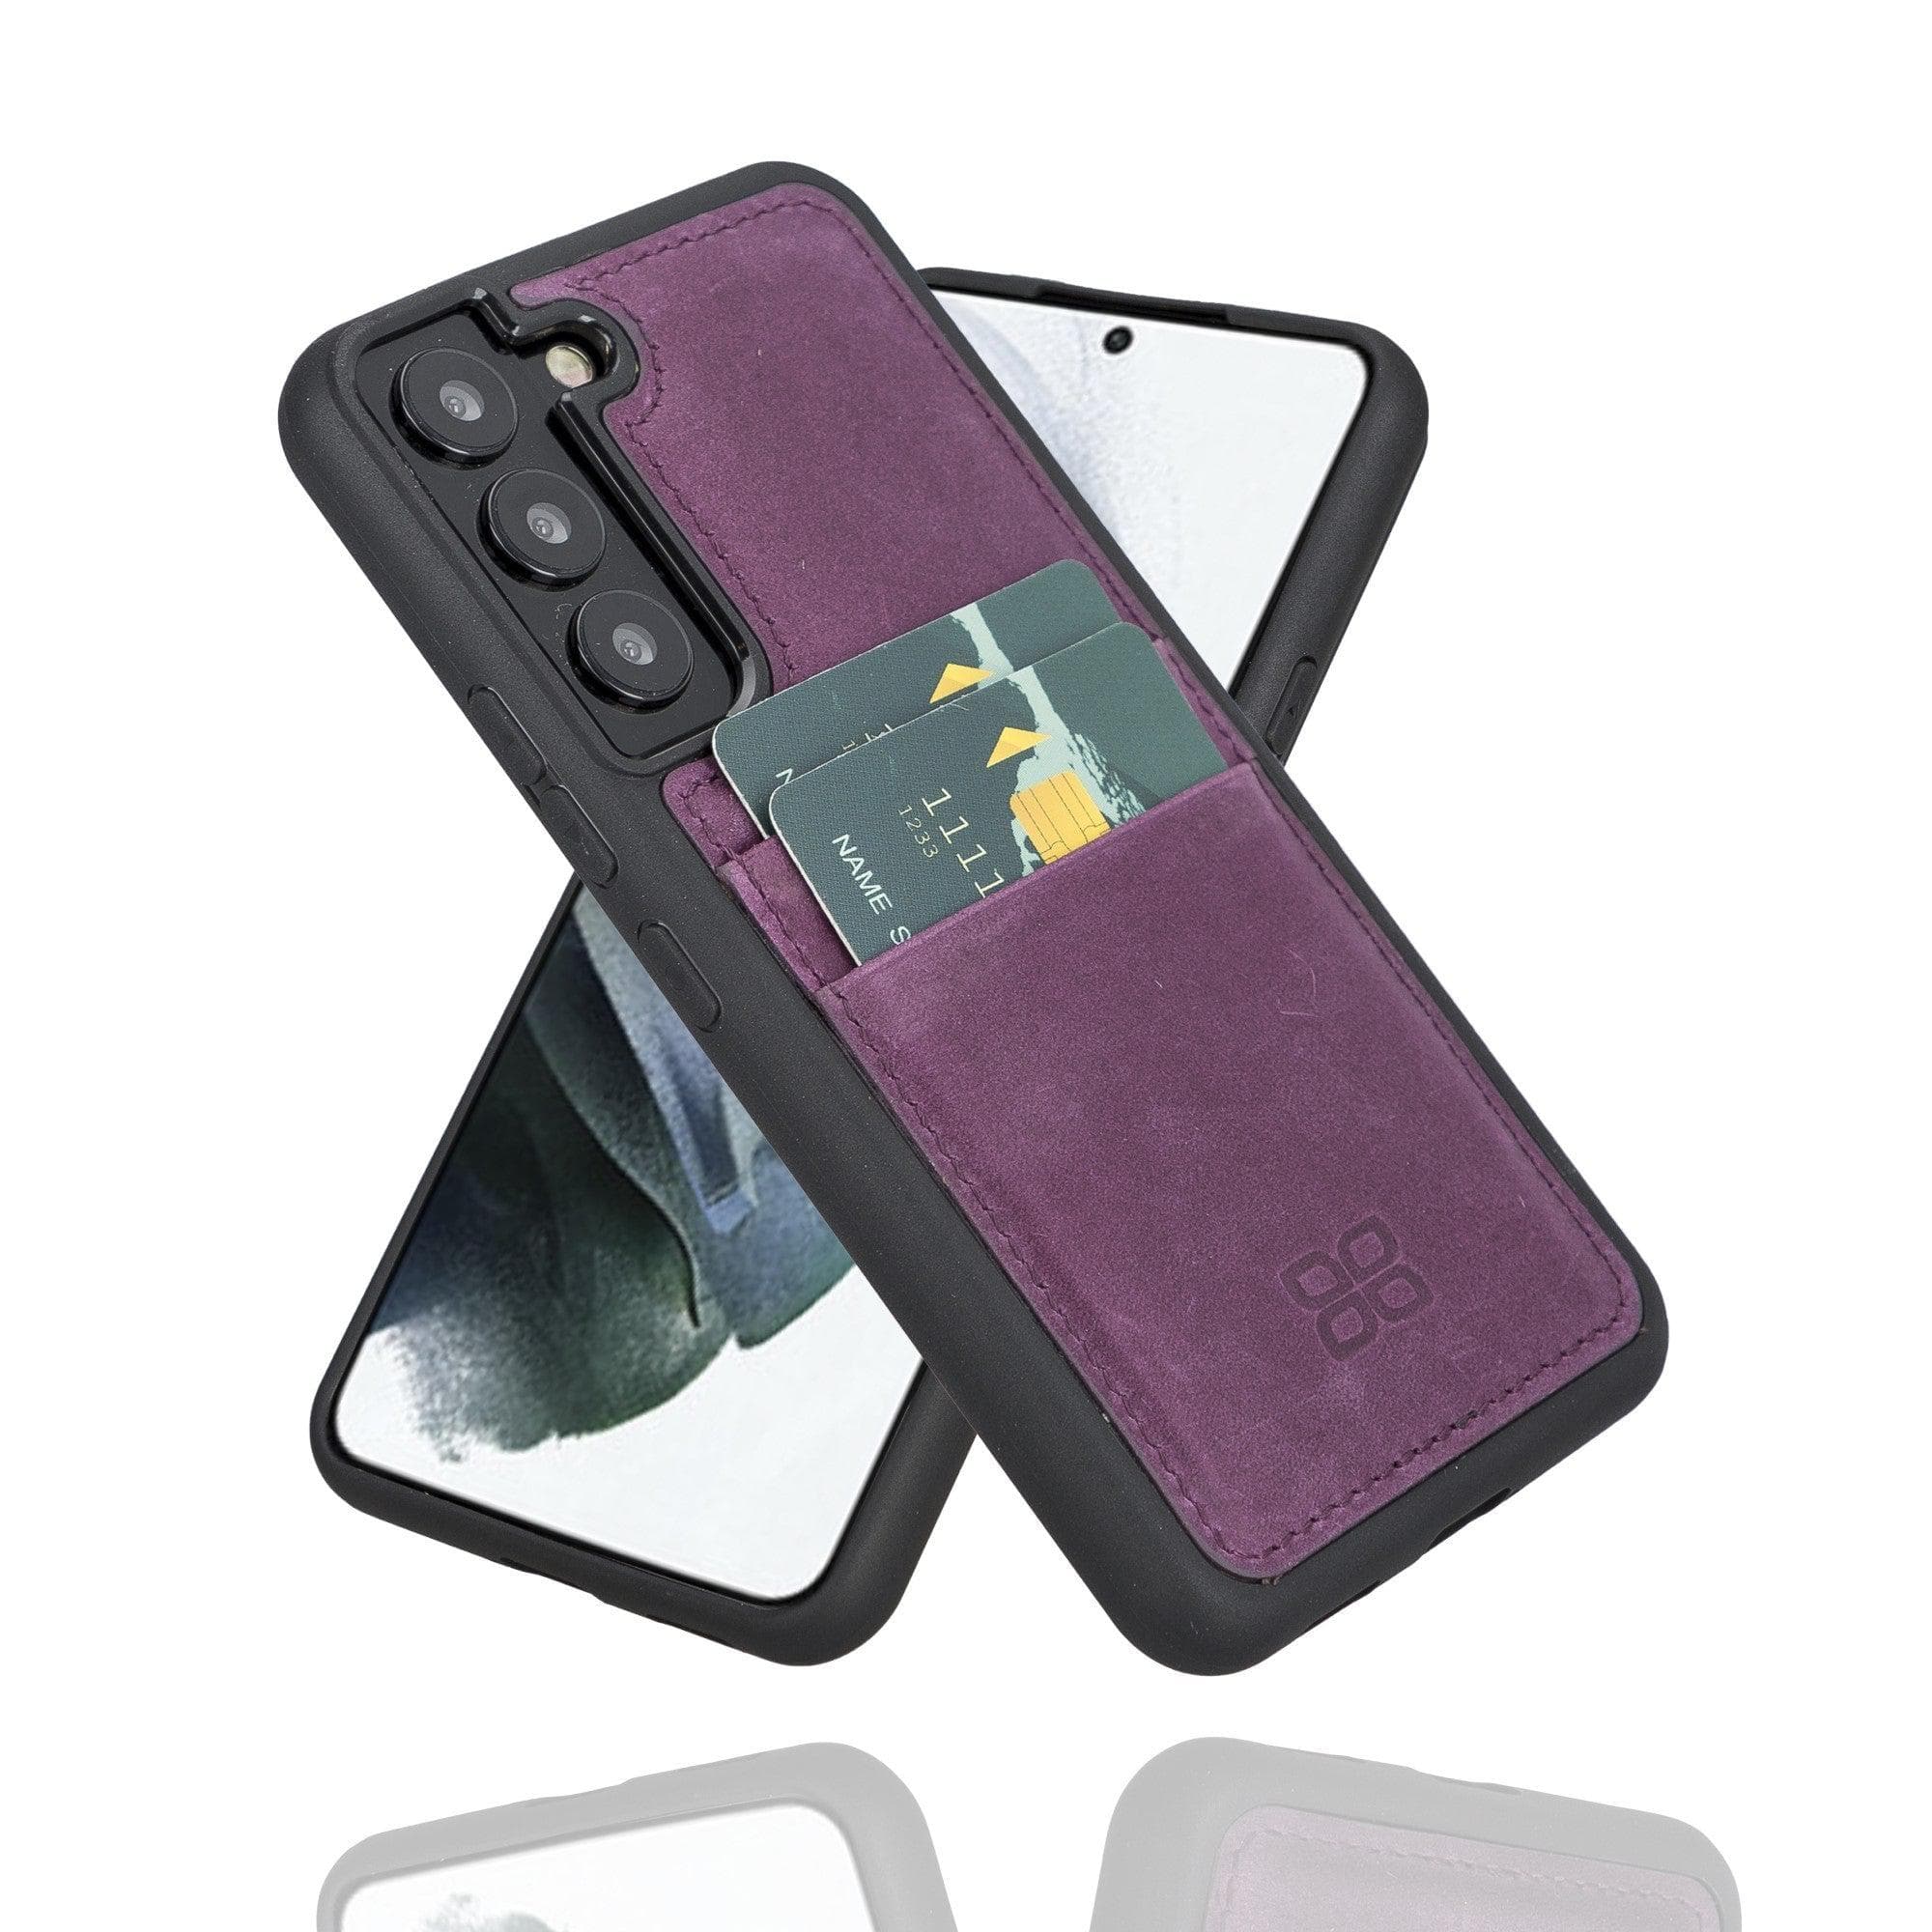 Samsung Galaxy S22 Series Genuine Leather Slim Back Cover Case with Card Holders Samsung Galaxy S22 / Purple Bouletta